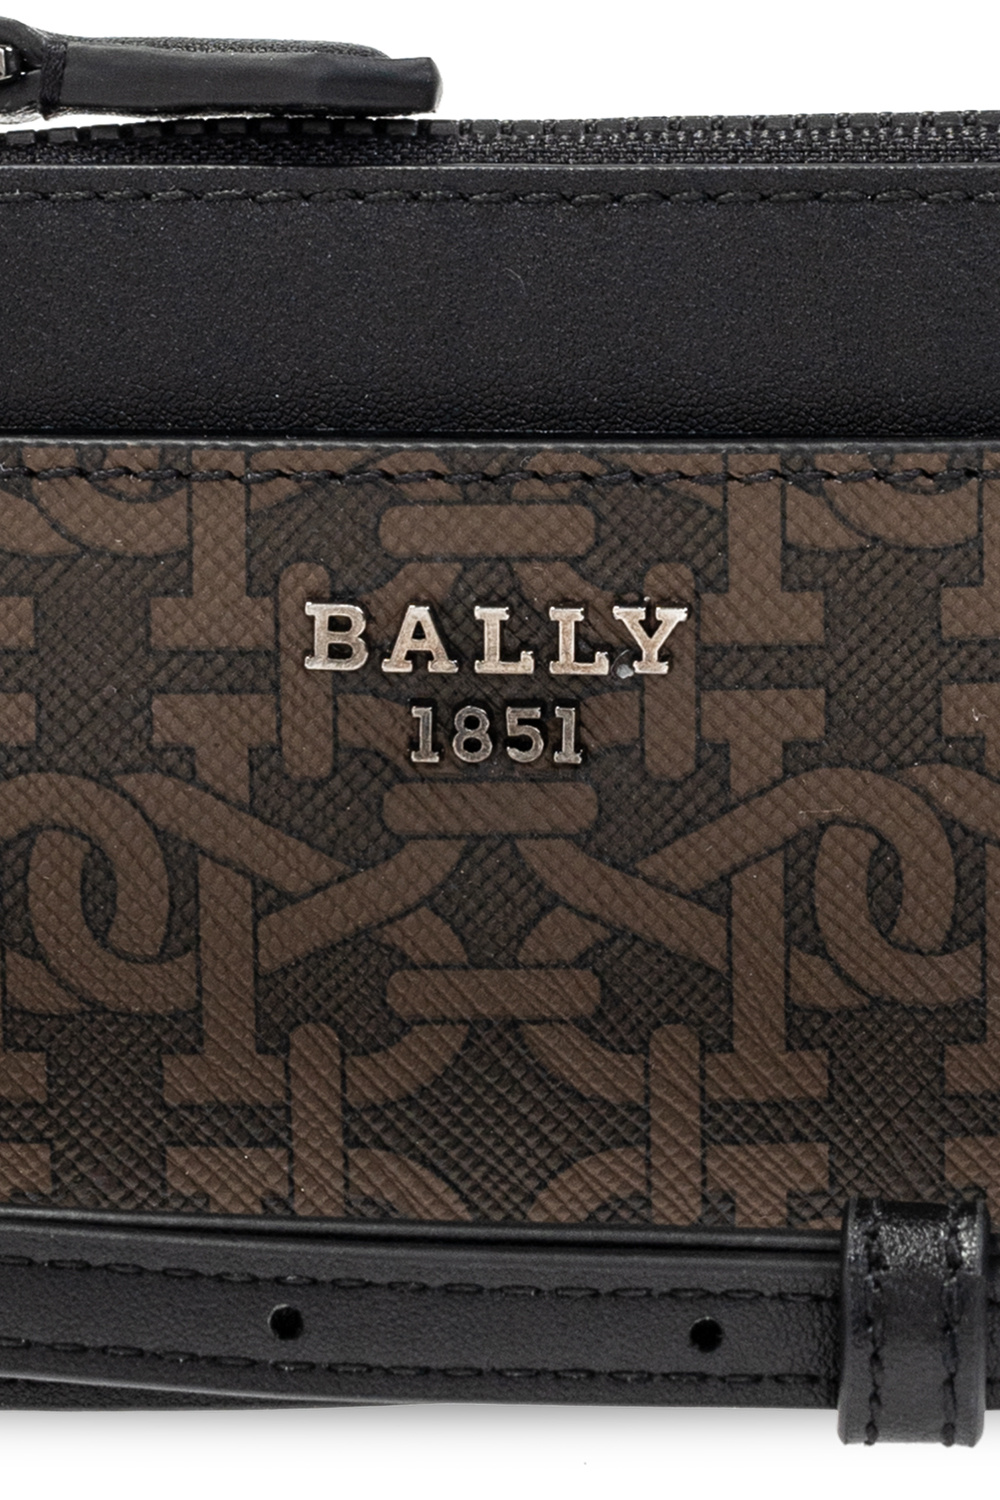 Bally Choose your location